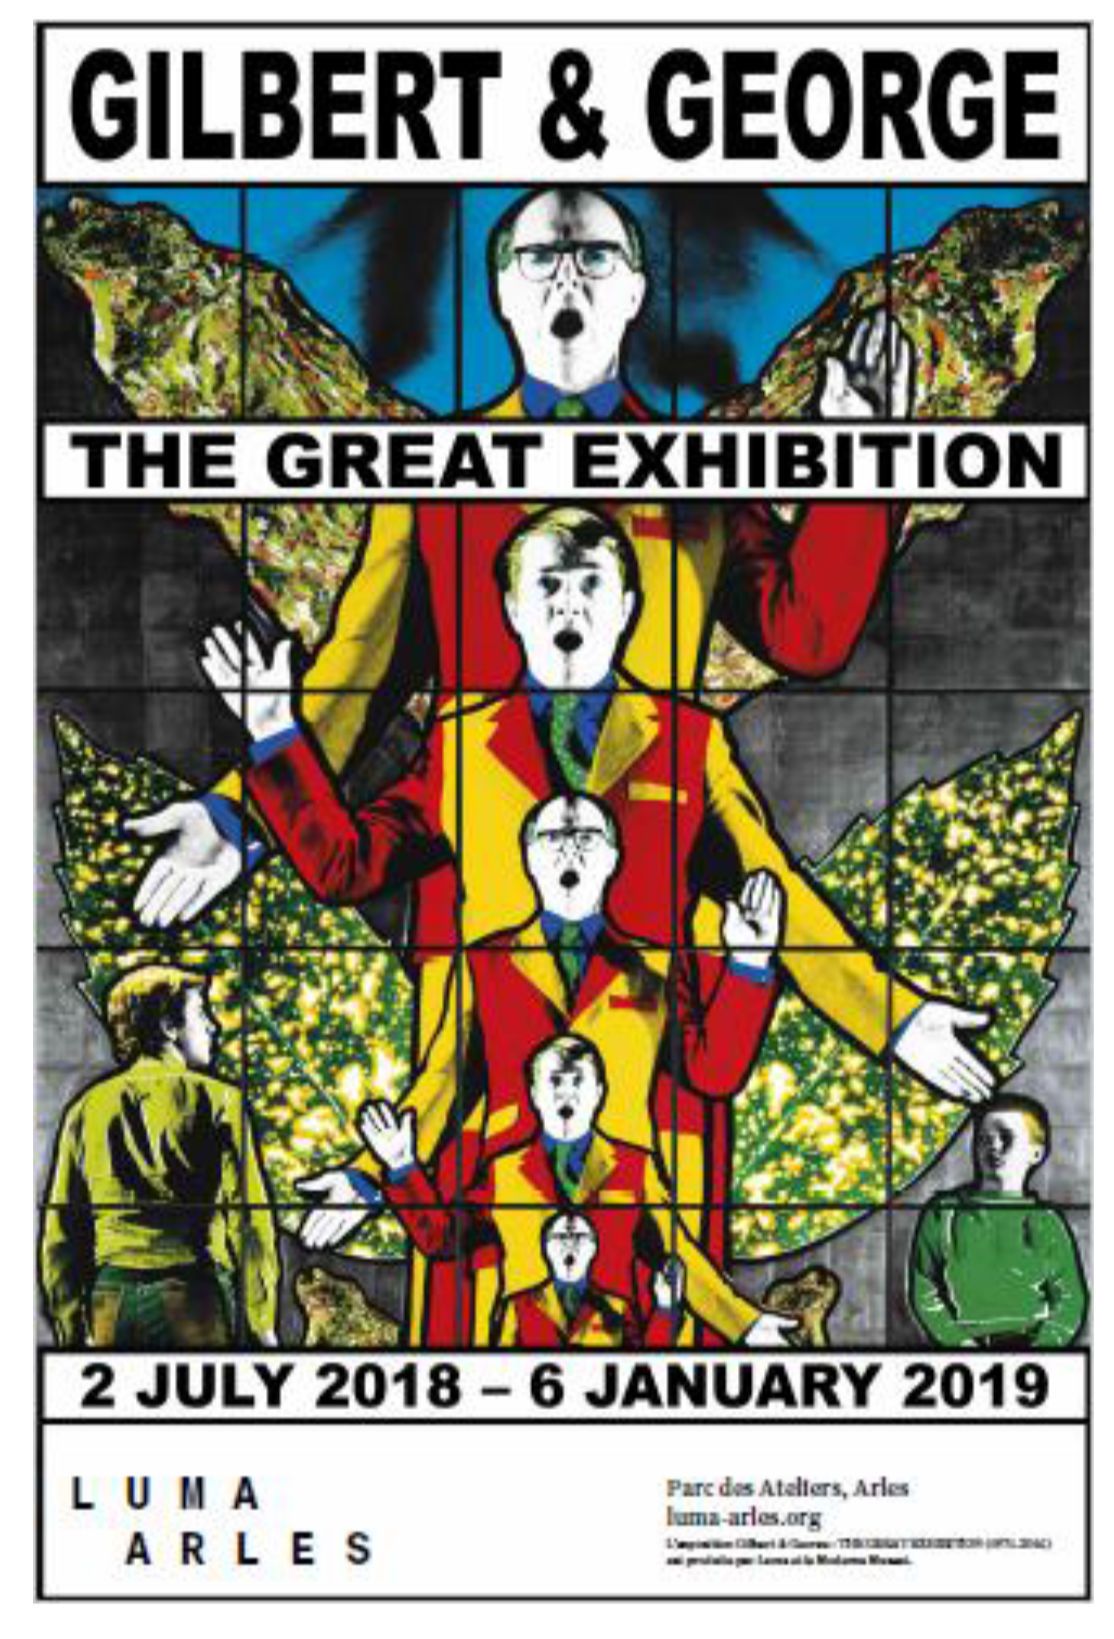 GILBERT & GEORGE Gilbert et George

Luma Arles 2018-2019

At a time of reflectio&hellip;